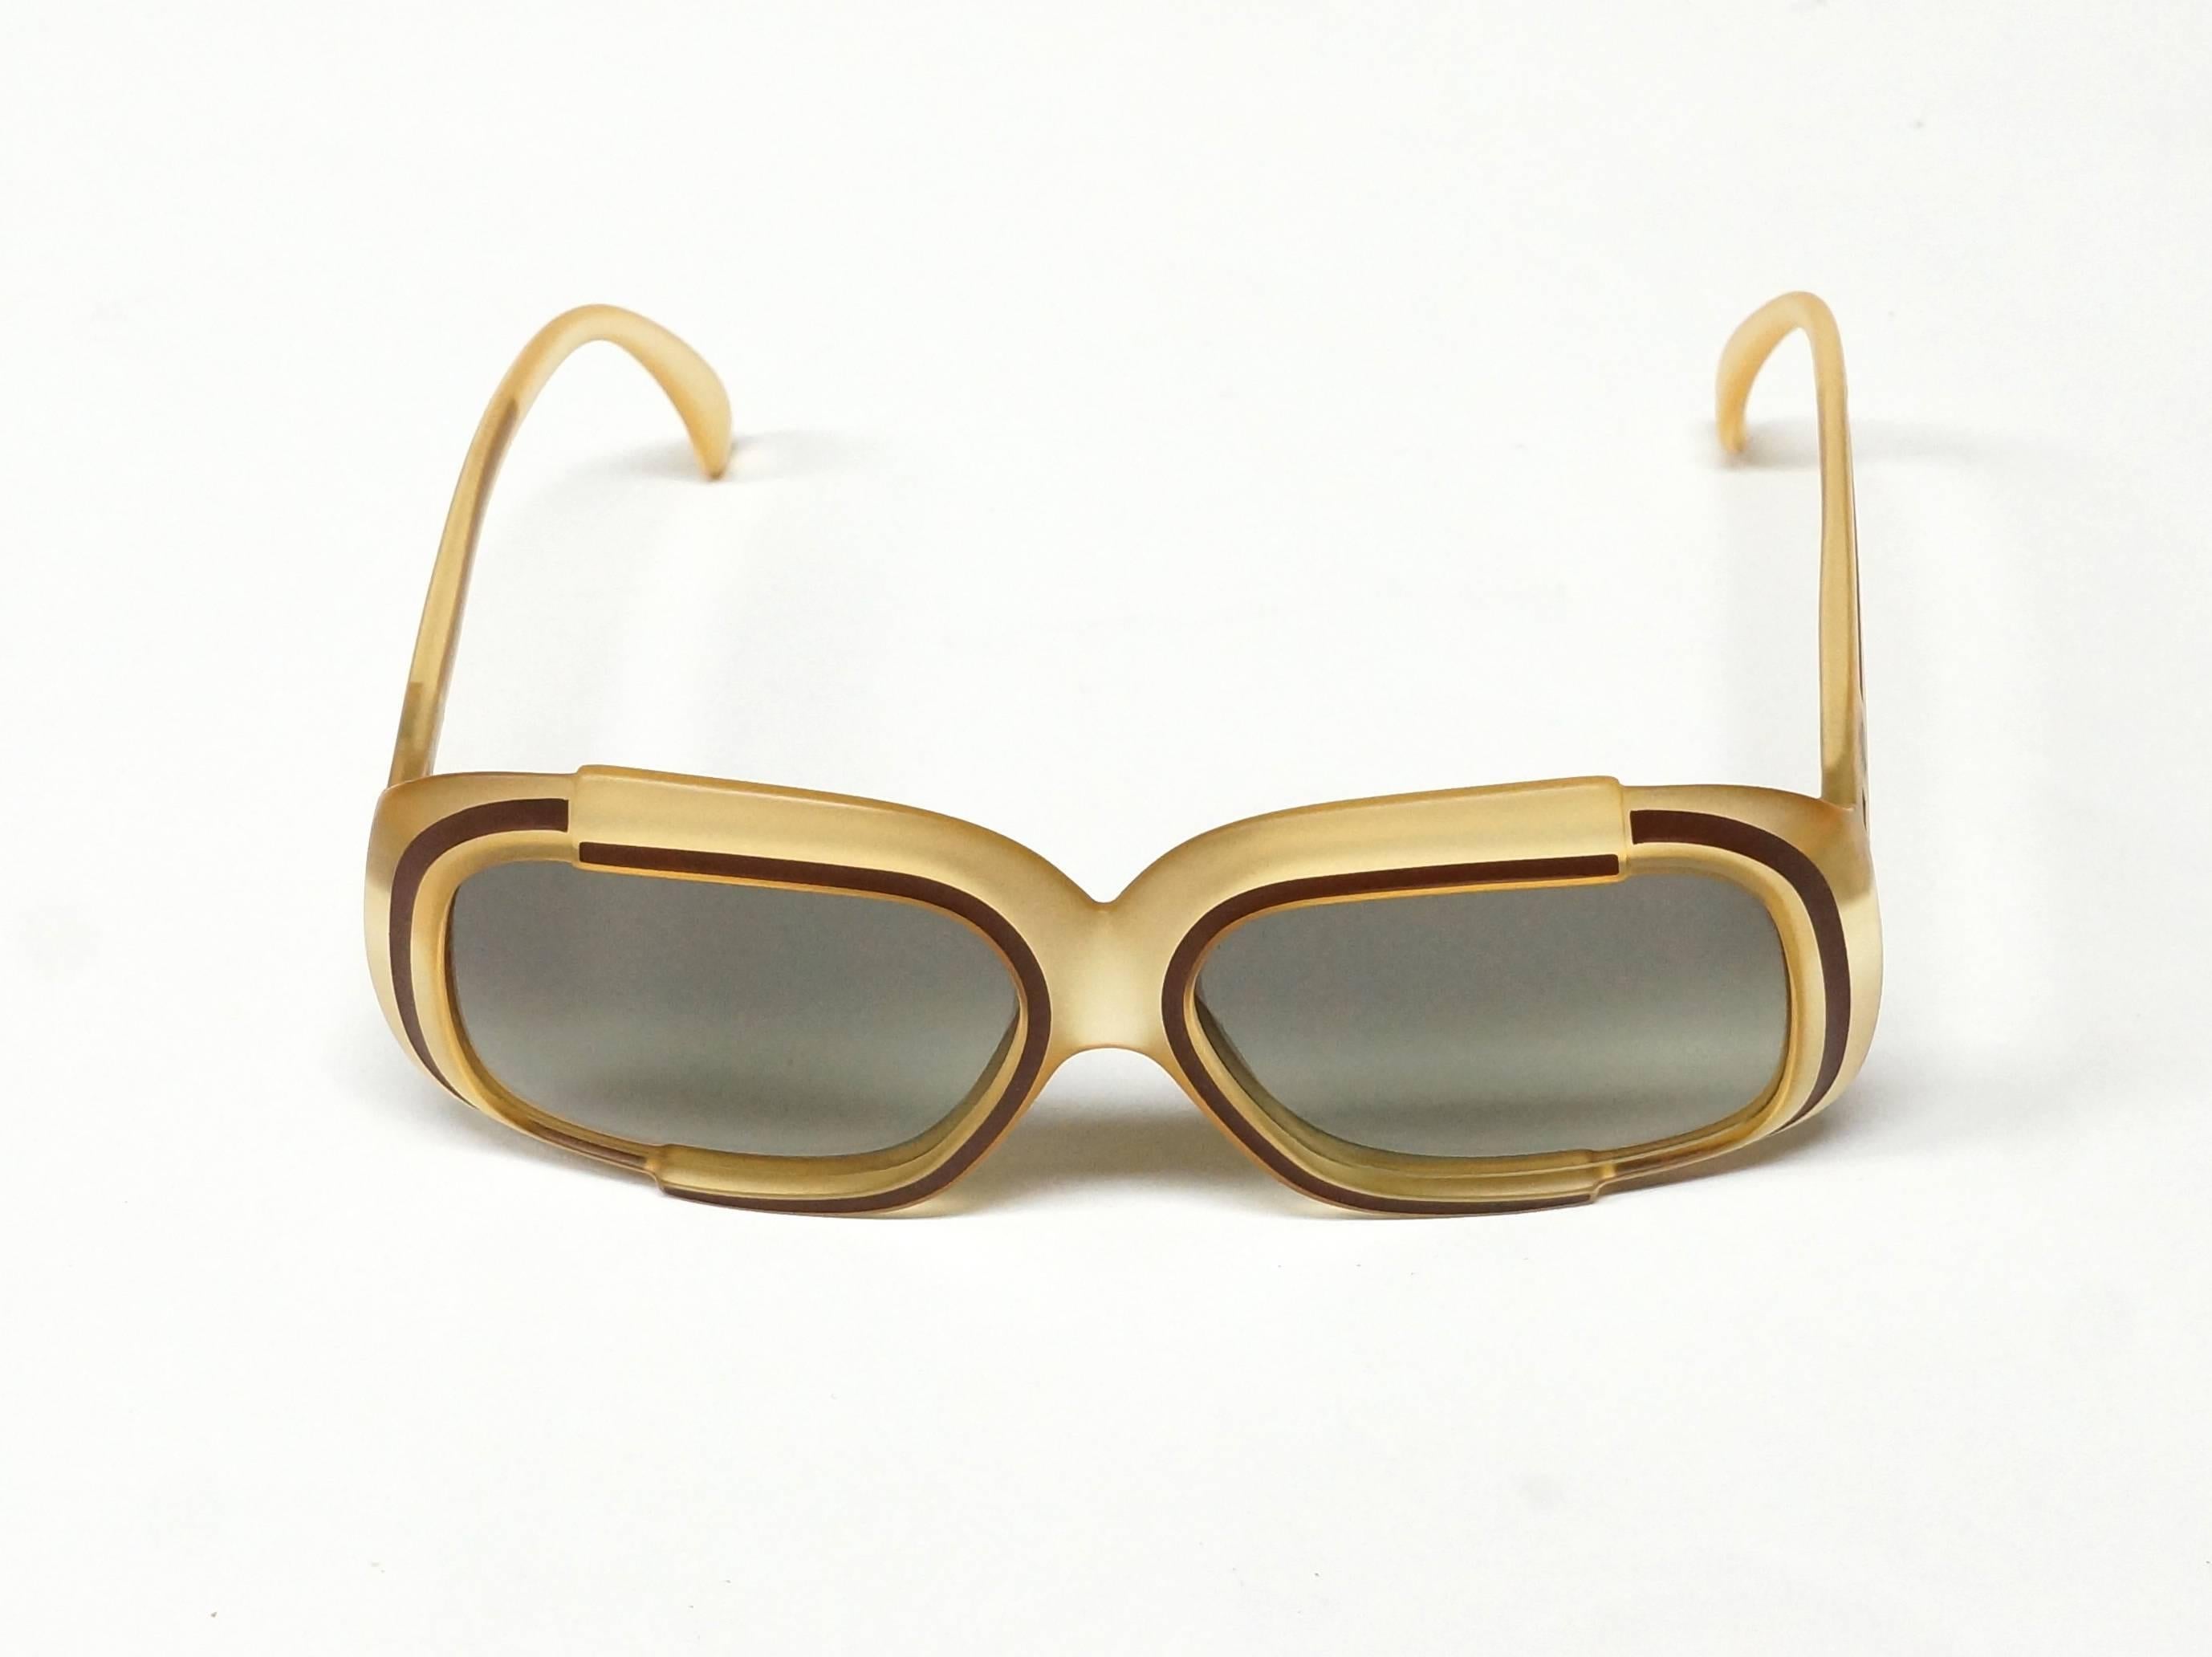 1970s Christian Dior Sunglasses in New Old Stock Condition For Sale 1